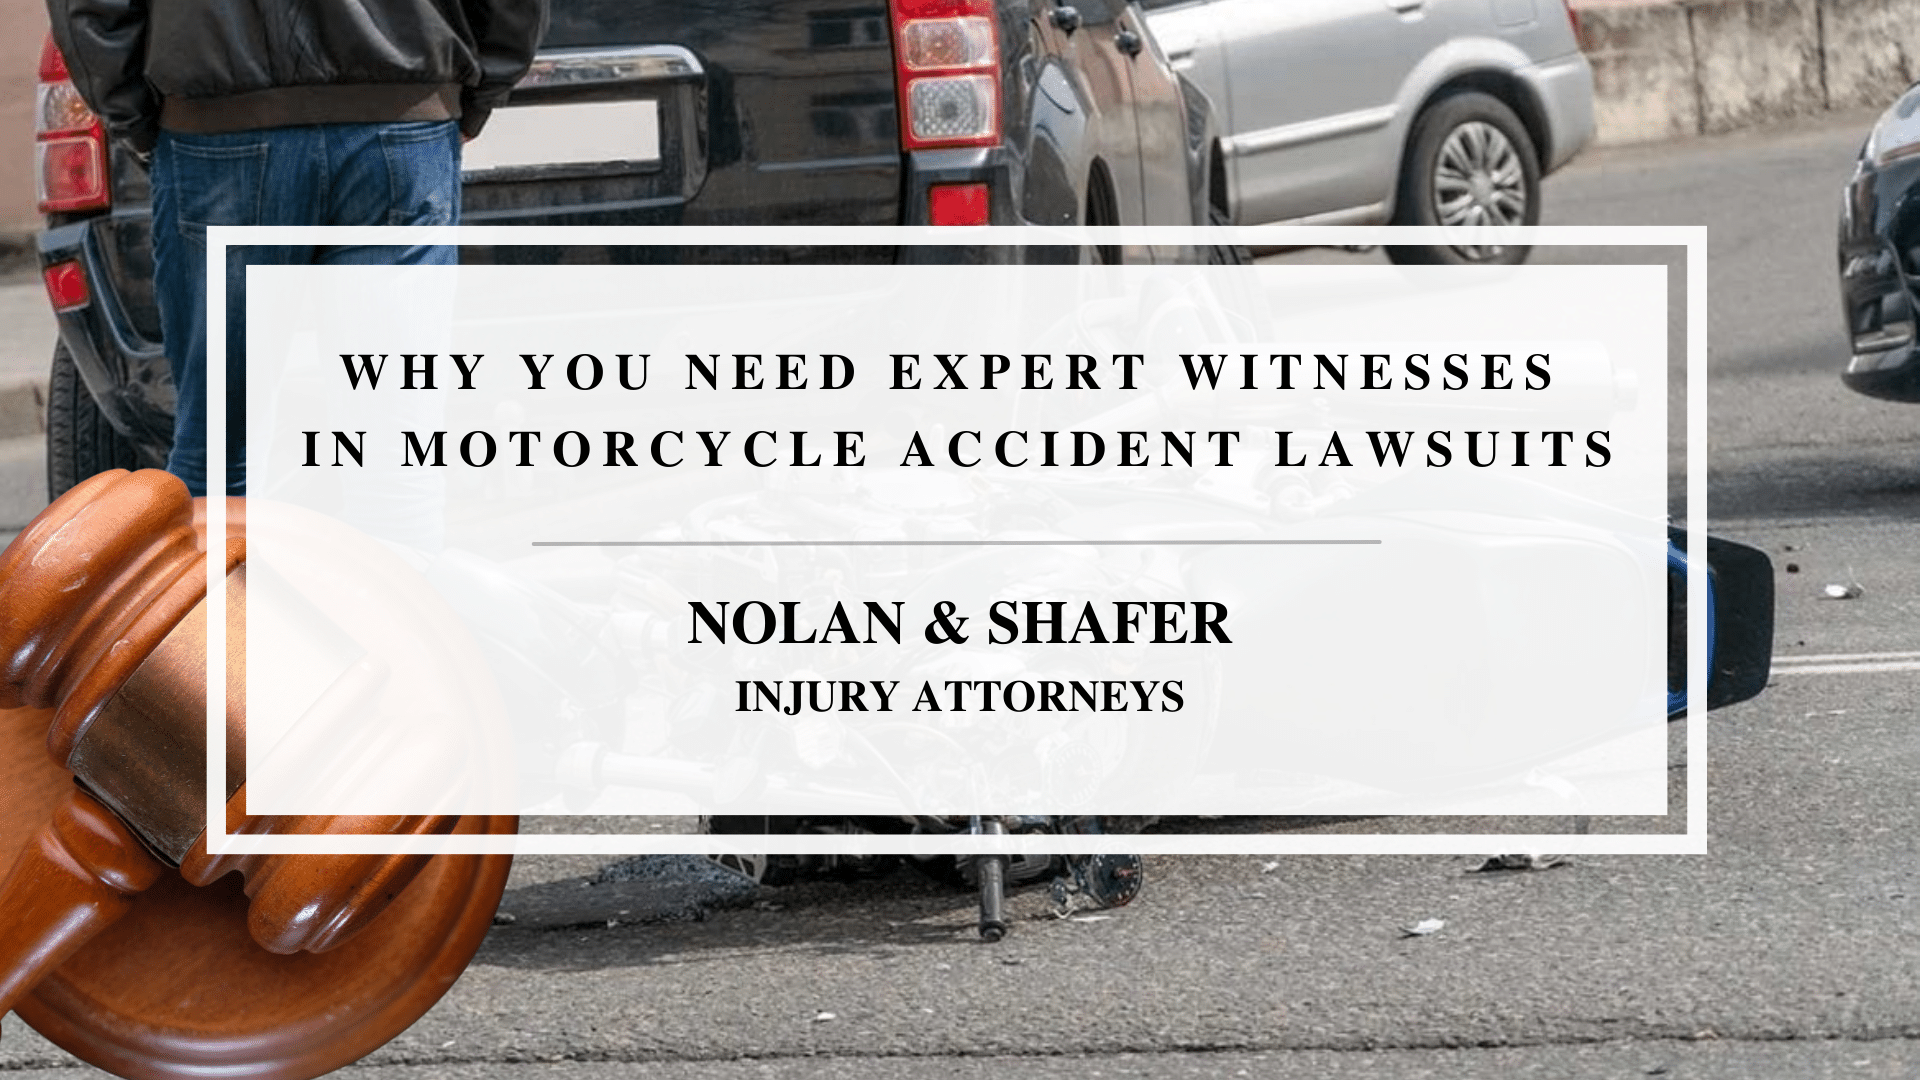 Featured image of why you need expert witnesses in motorcycle accident lawsuits